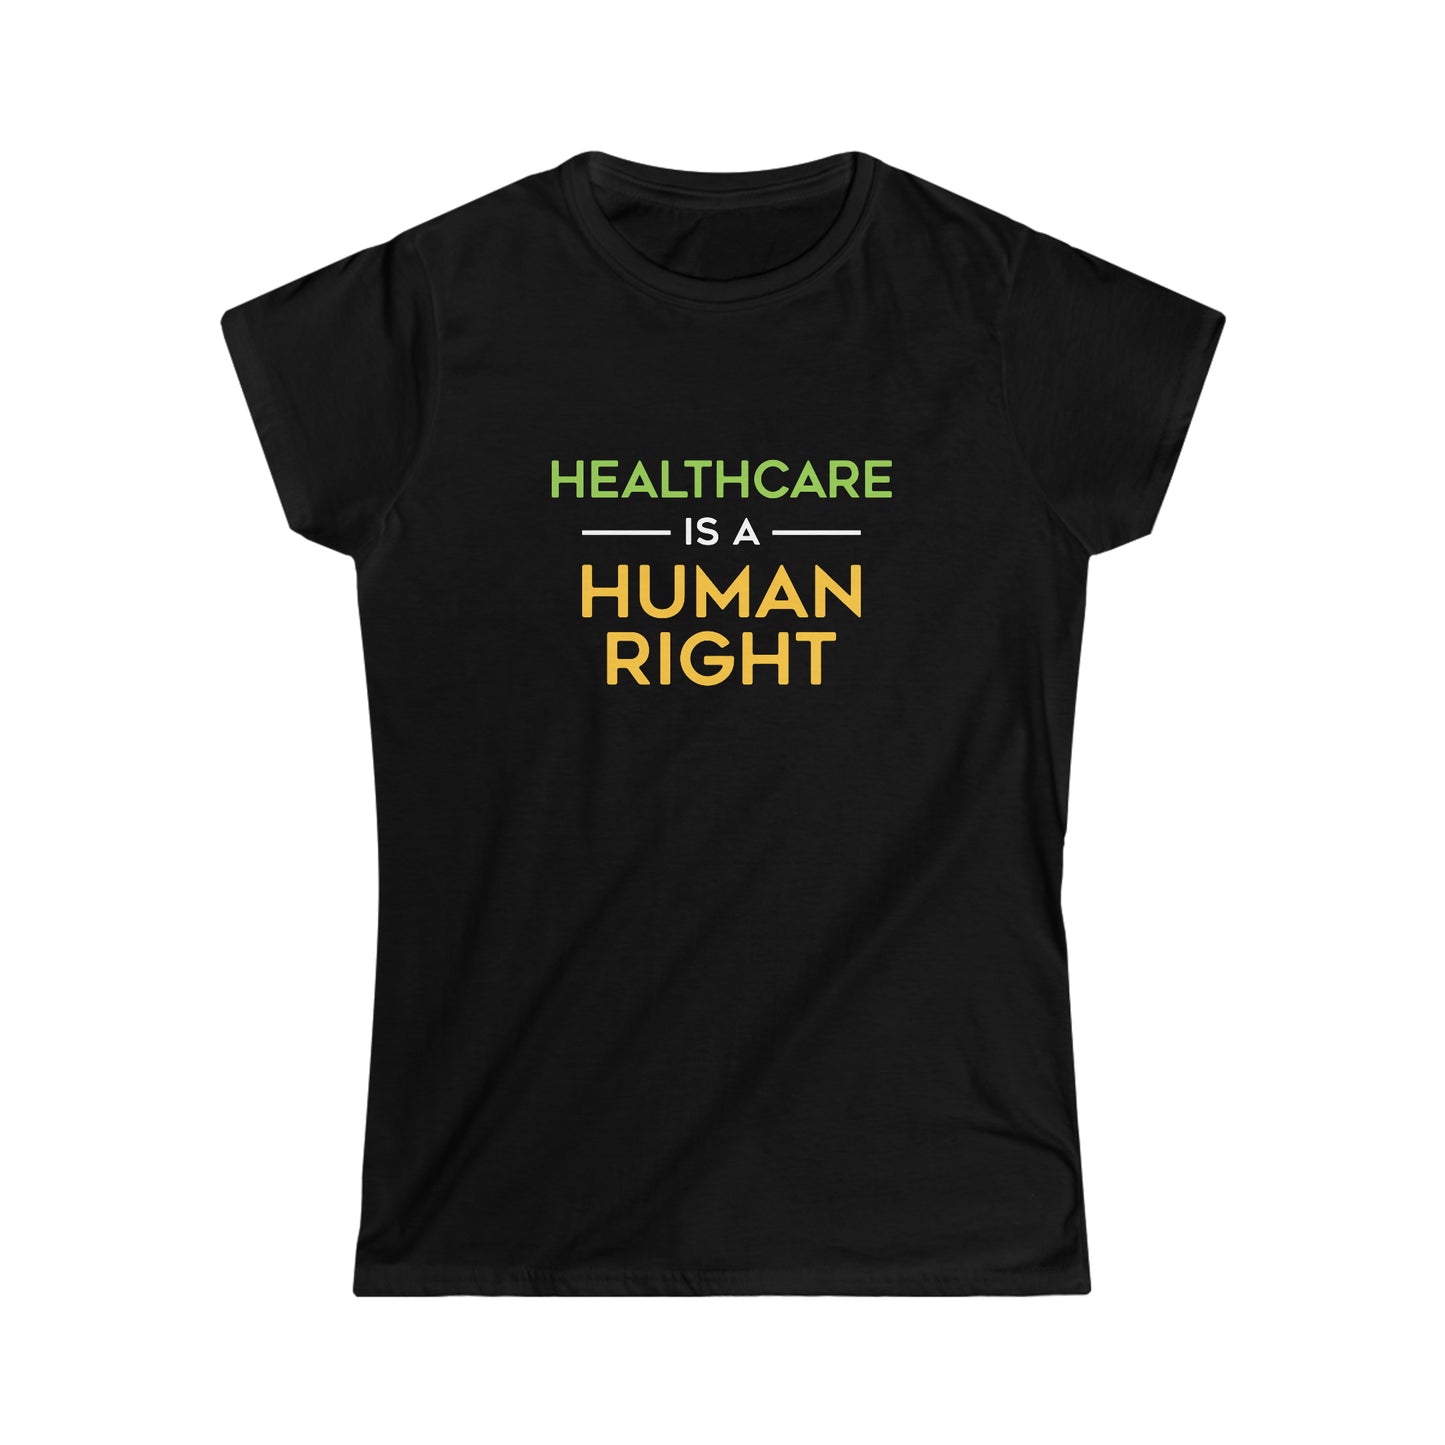 “Healthcare Is A Human Right” Women’s T-Shirts